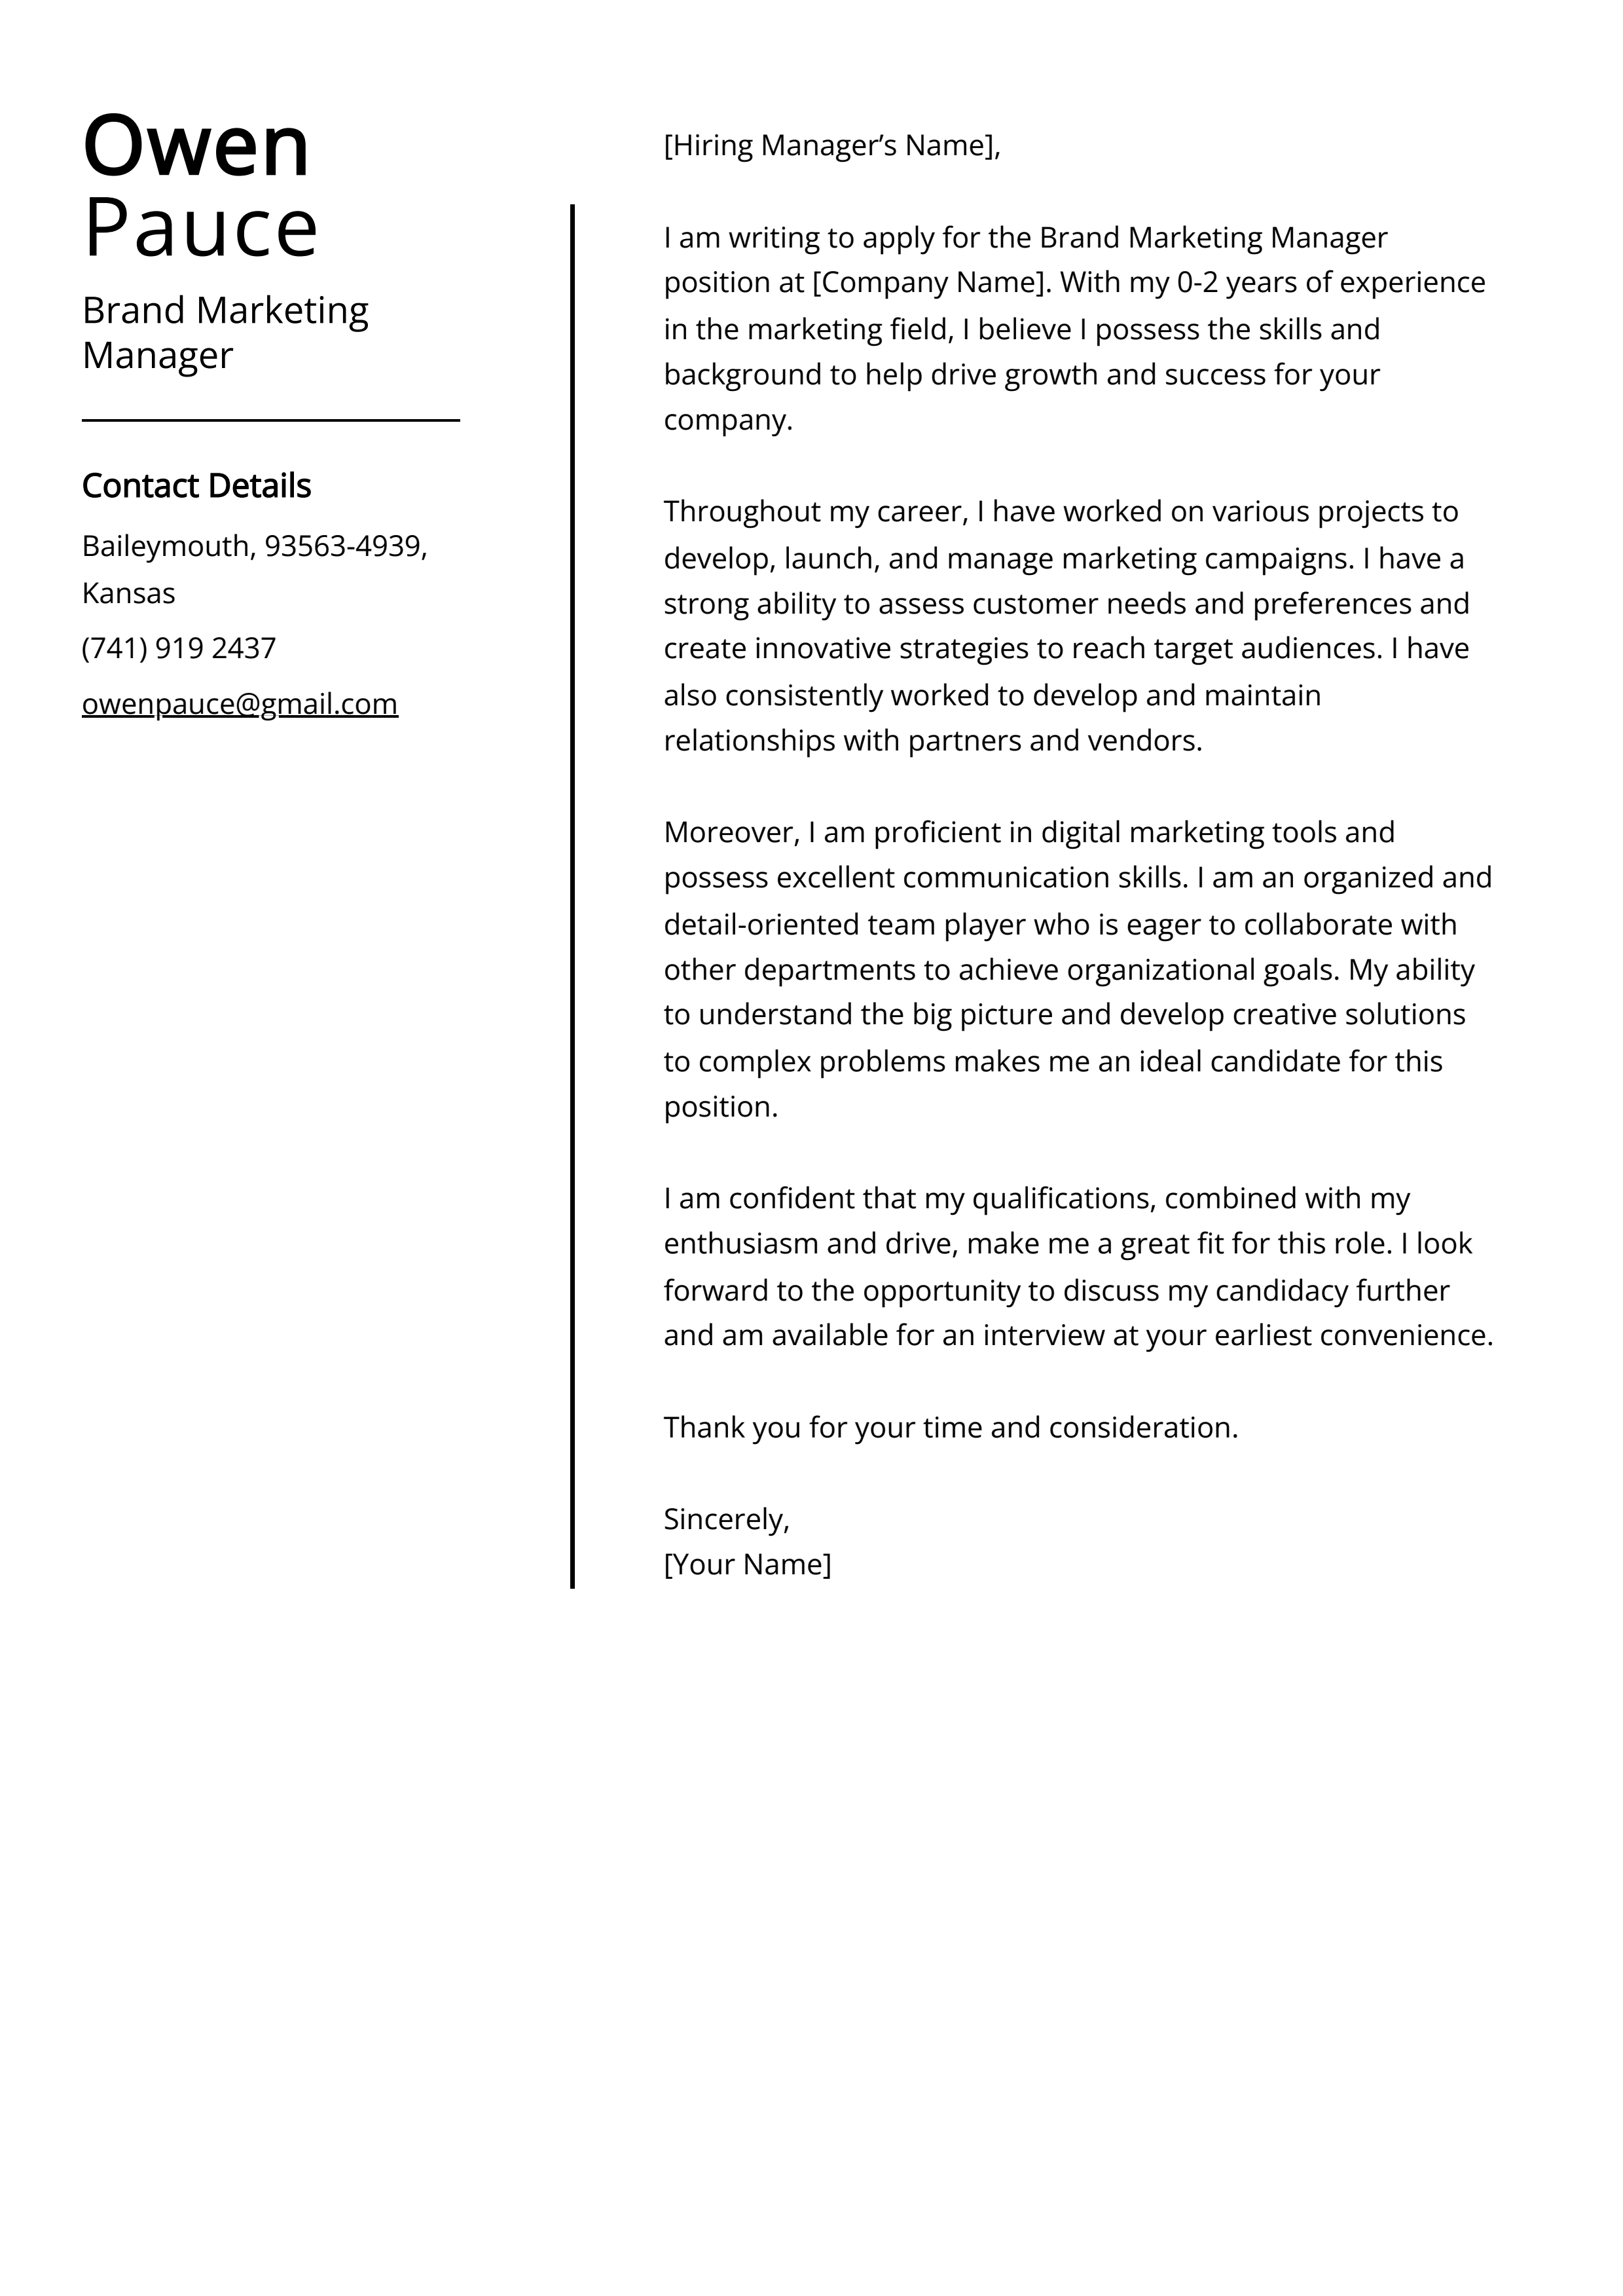 Brand Marketing Manager Cover Letter Example